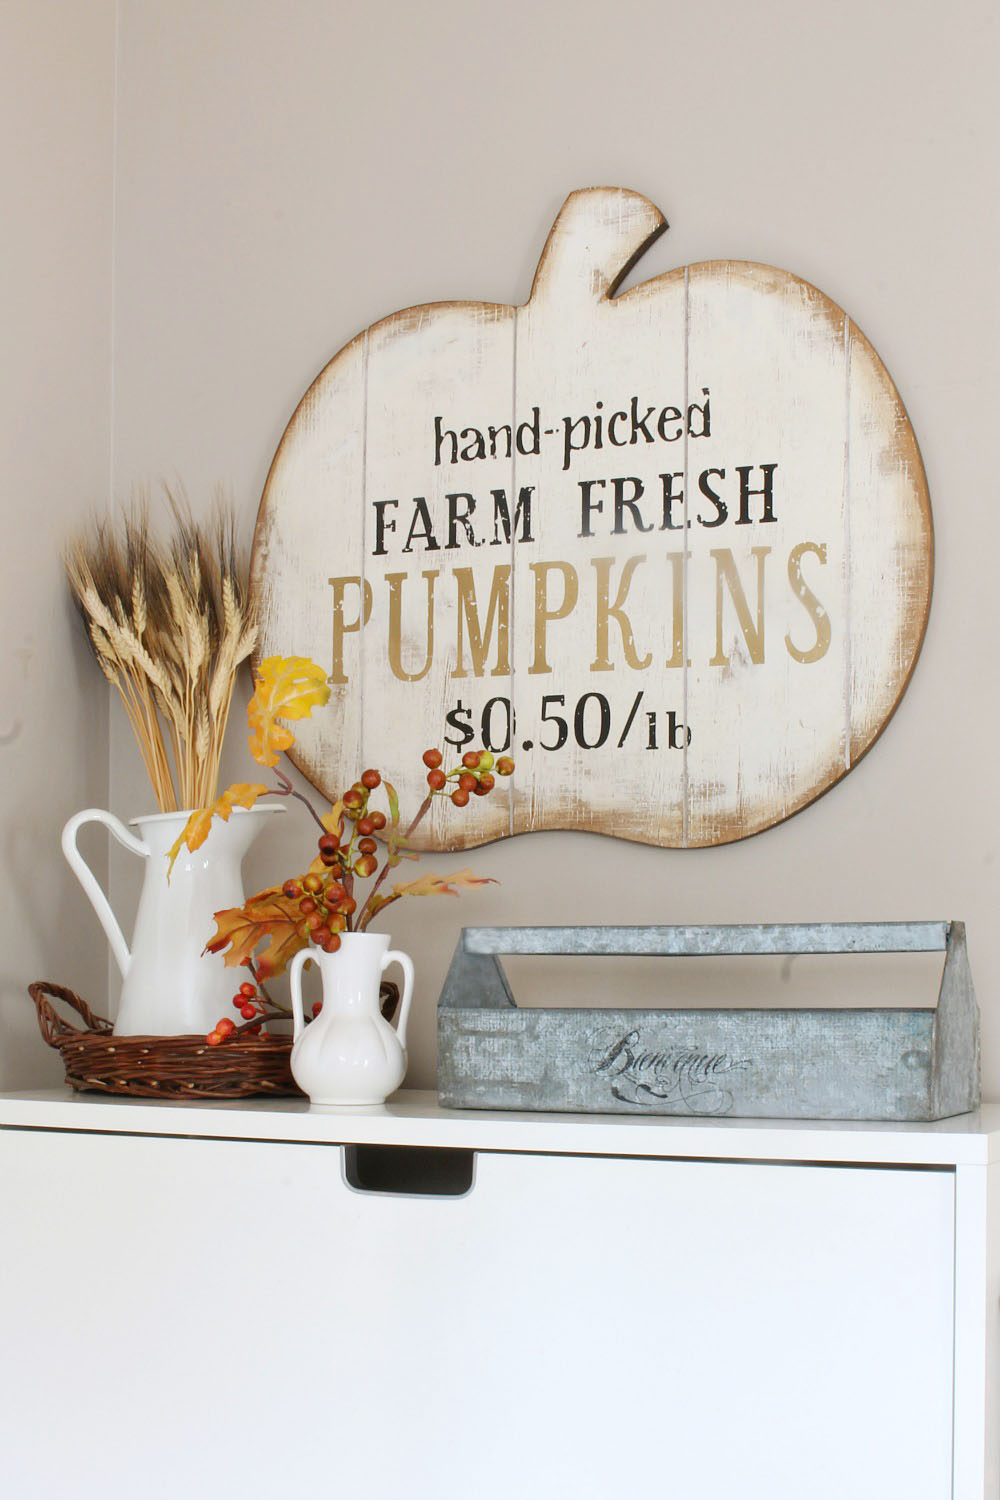 Fall front entry decorating ideas. Create a welcome entry for family and friends with these simple ideas to dress up your front entry for fall.